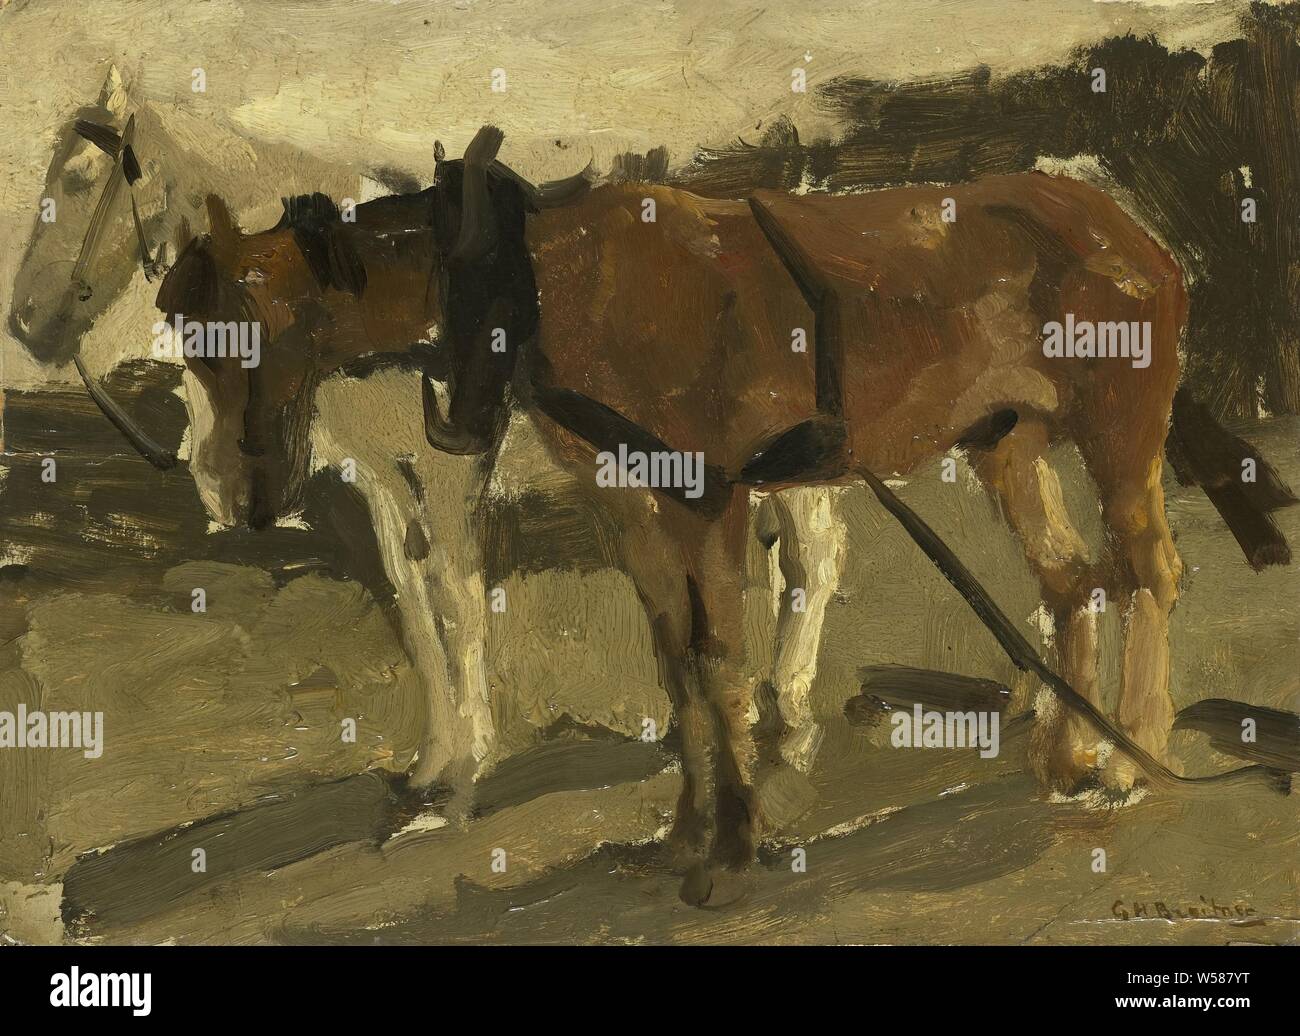 A Brown and a White Horse in Scheveningen, A brown and a white horse, horse, Scheveningen, George Hendrik Breitner (mentioned on object), Netherlands, c. 1880 - c. 1923, panel, oil paint (paint), h 26.9 cm × w 37.3 cm × t 1.6 cm × d 10 cm Stock Photo